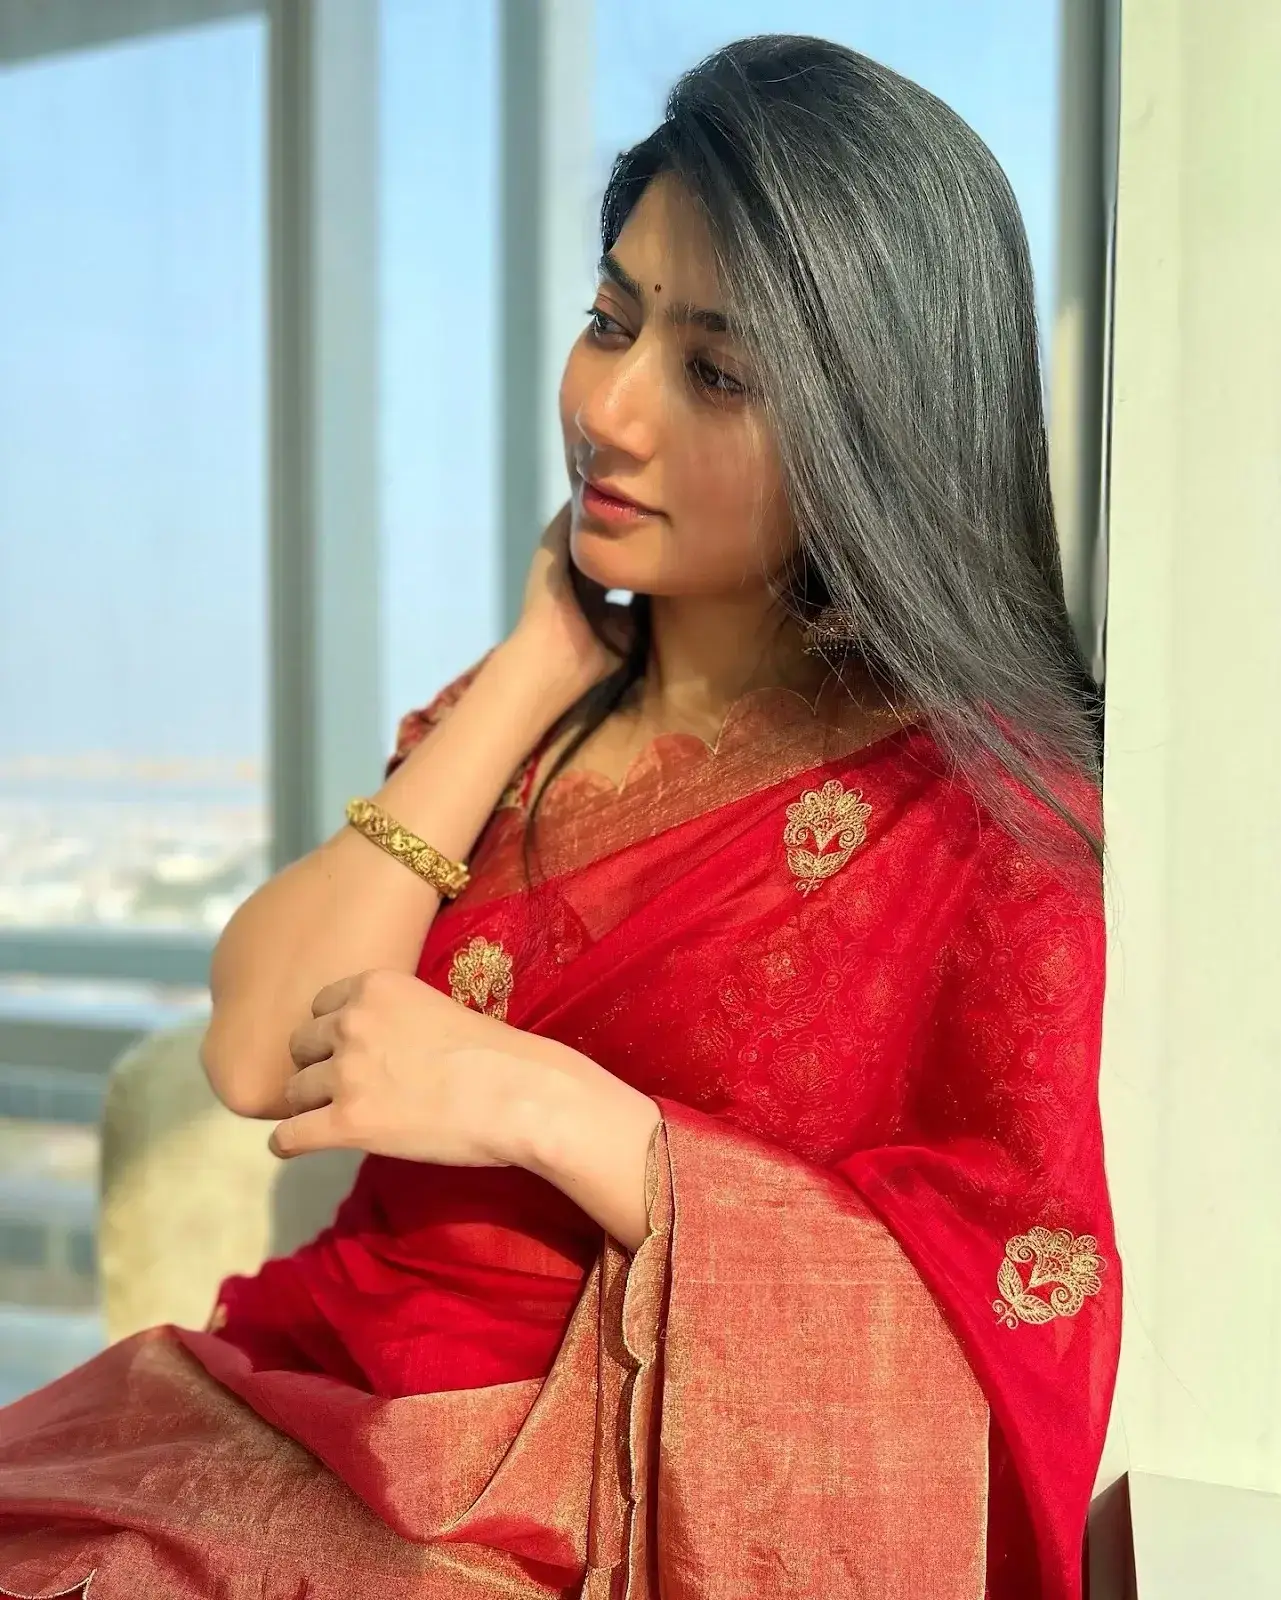 INDIAN GIRL SAI PALLAVI LONG HAIR IMAGES IN TRADITIONAL RED SAREE 1